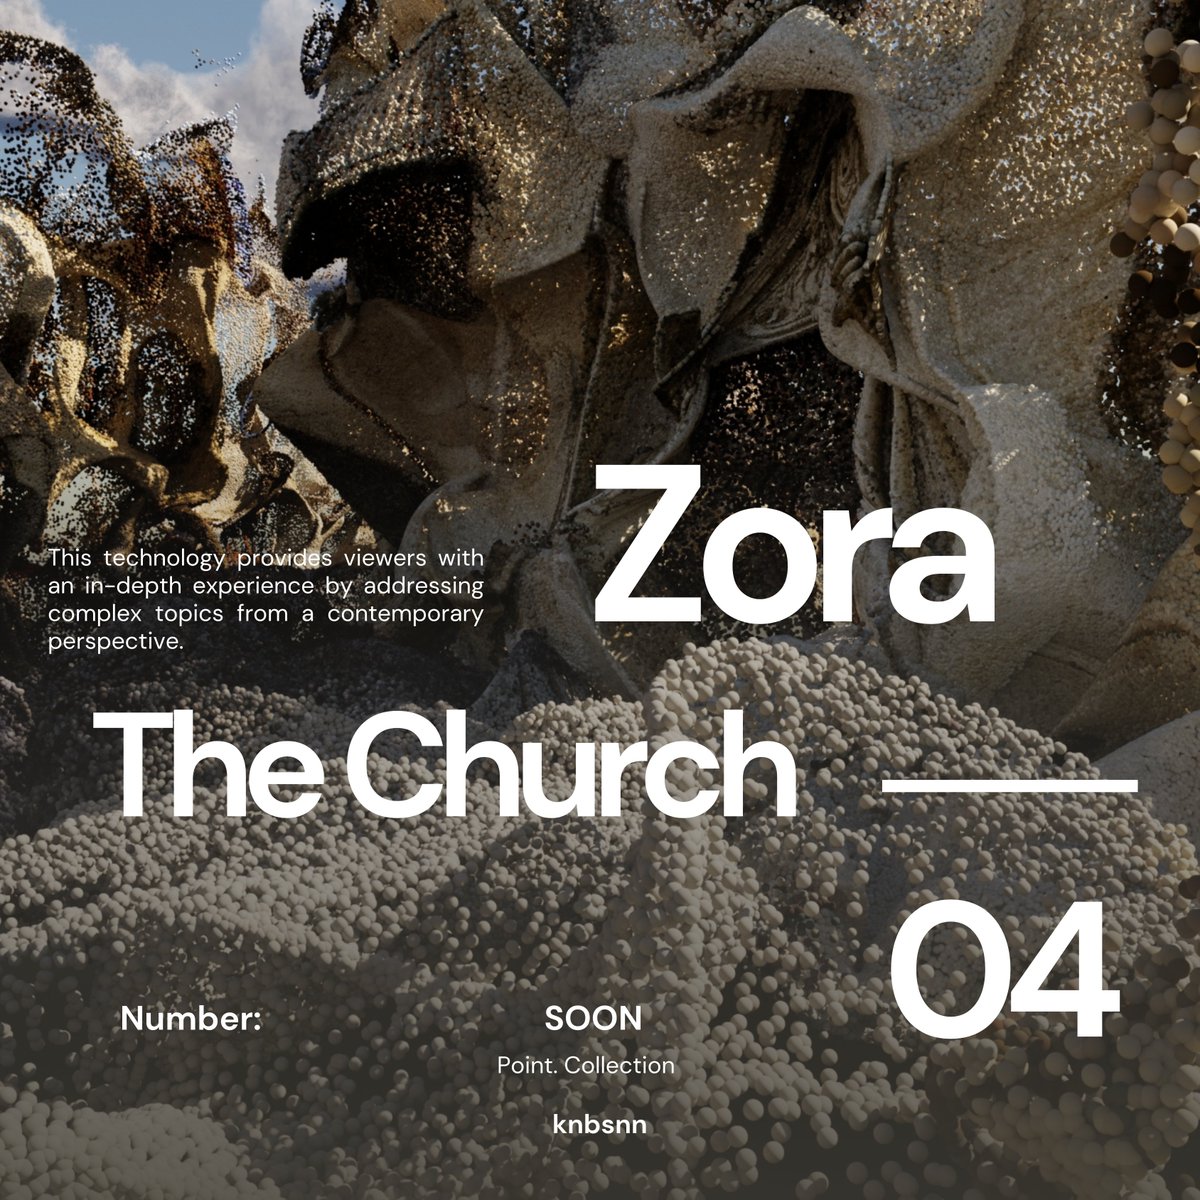 @ourZORA Soon The Church Point. C. Number 04